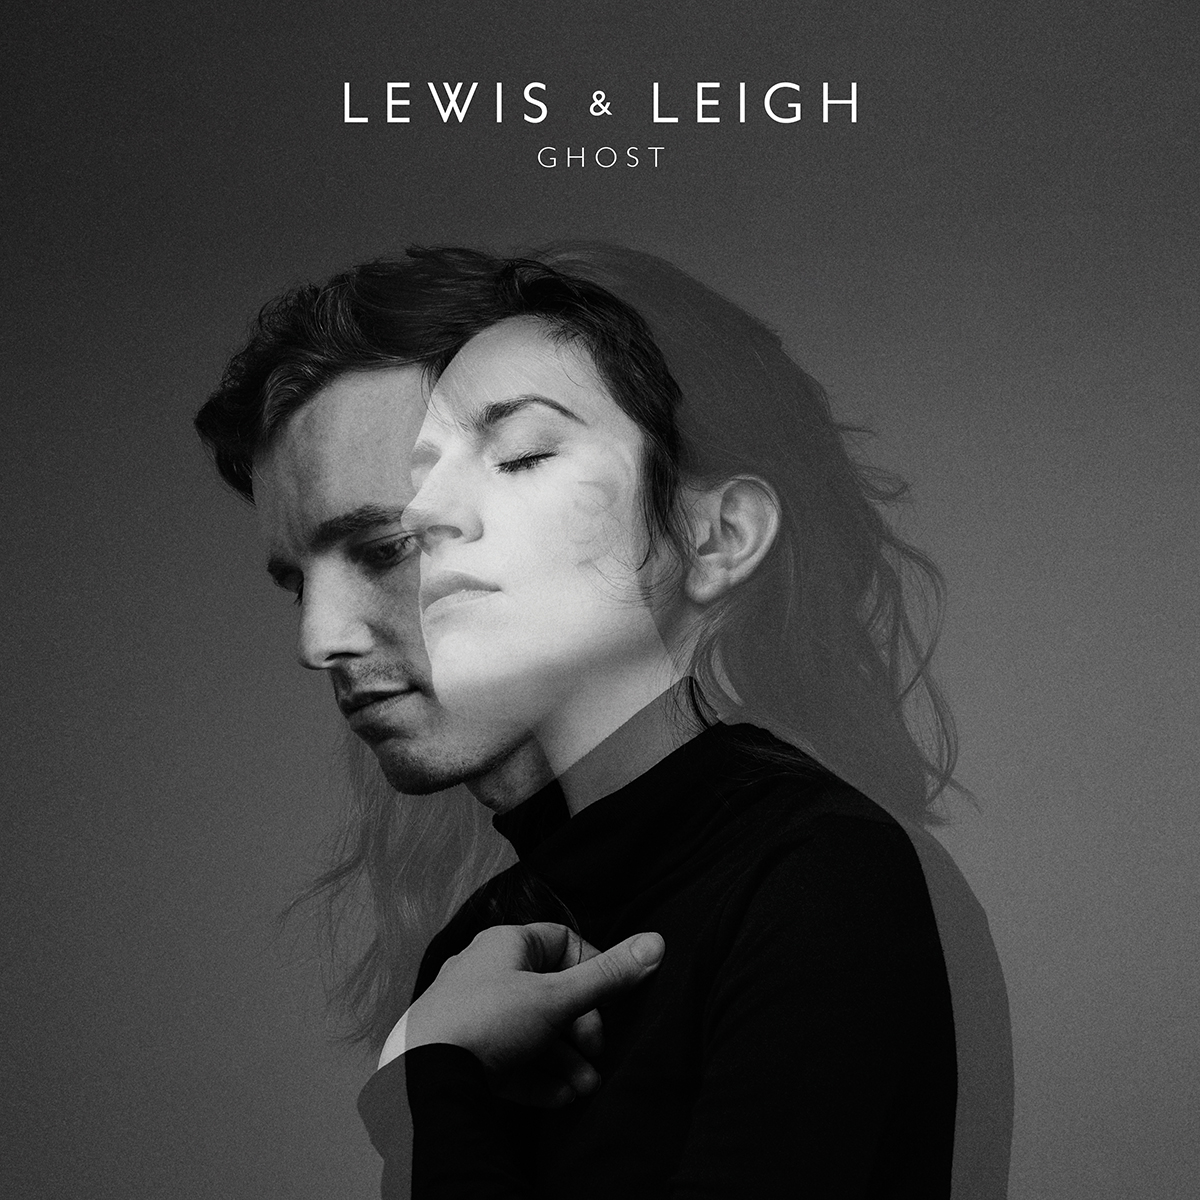 lewis & leigh ghost